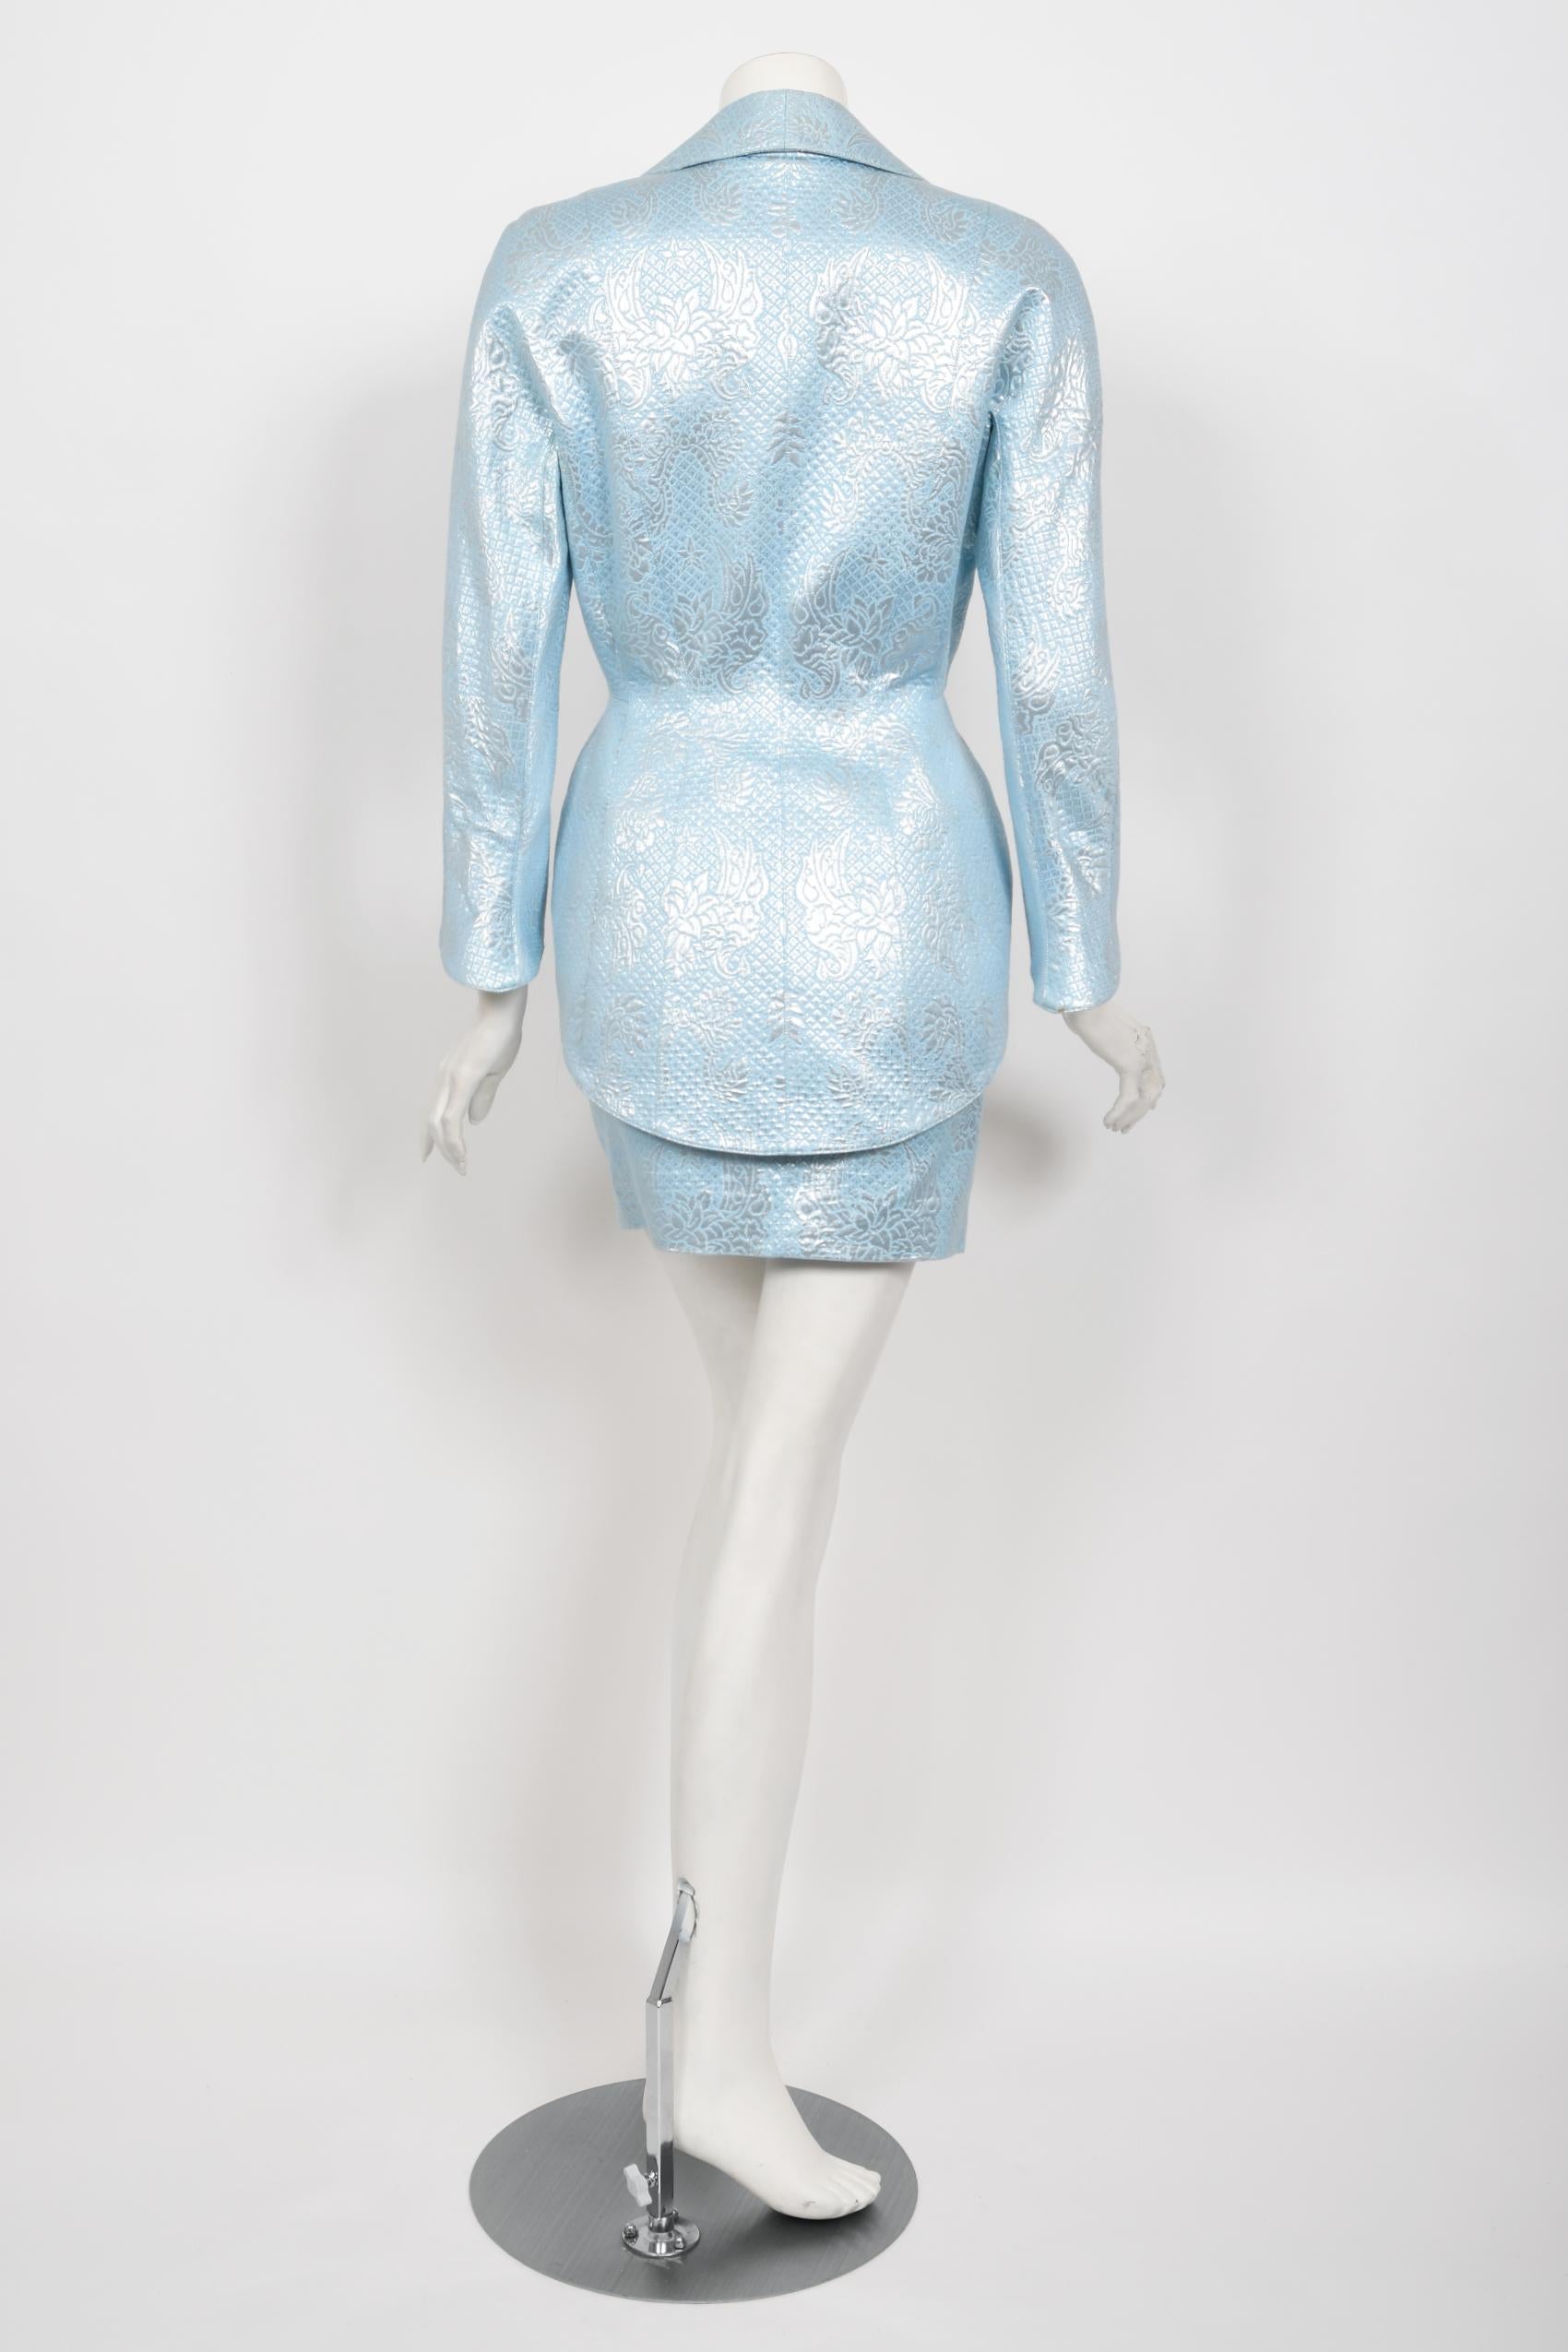 Iconic 1992 Thierry Mugler Couture Metallic Silver Blue Bustier Mini Skirt Suit For Sale 11